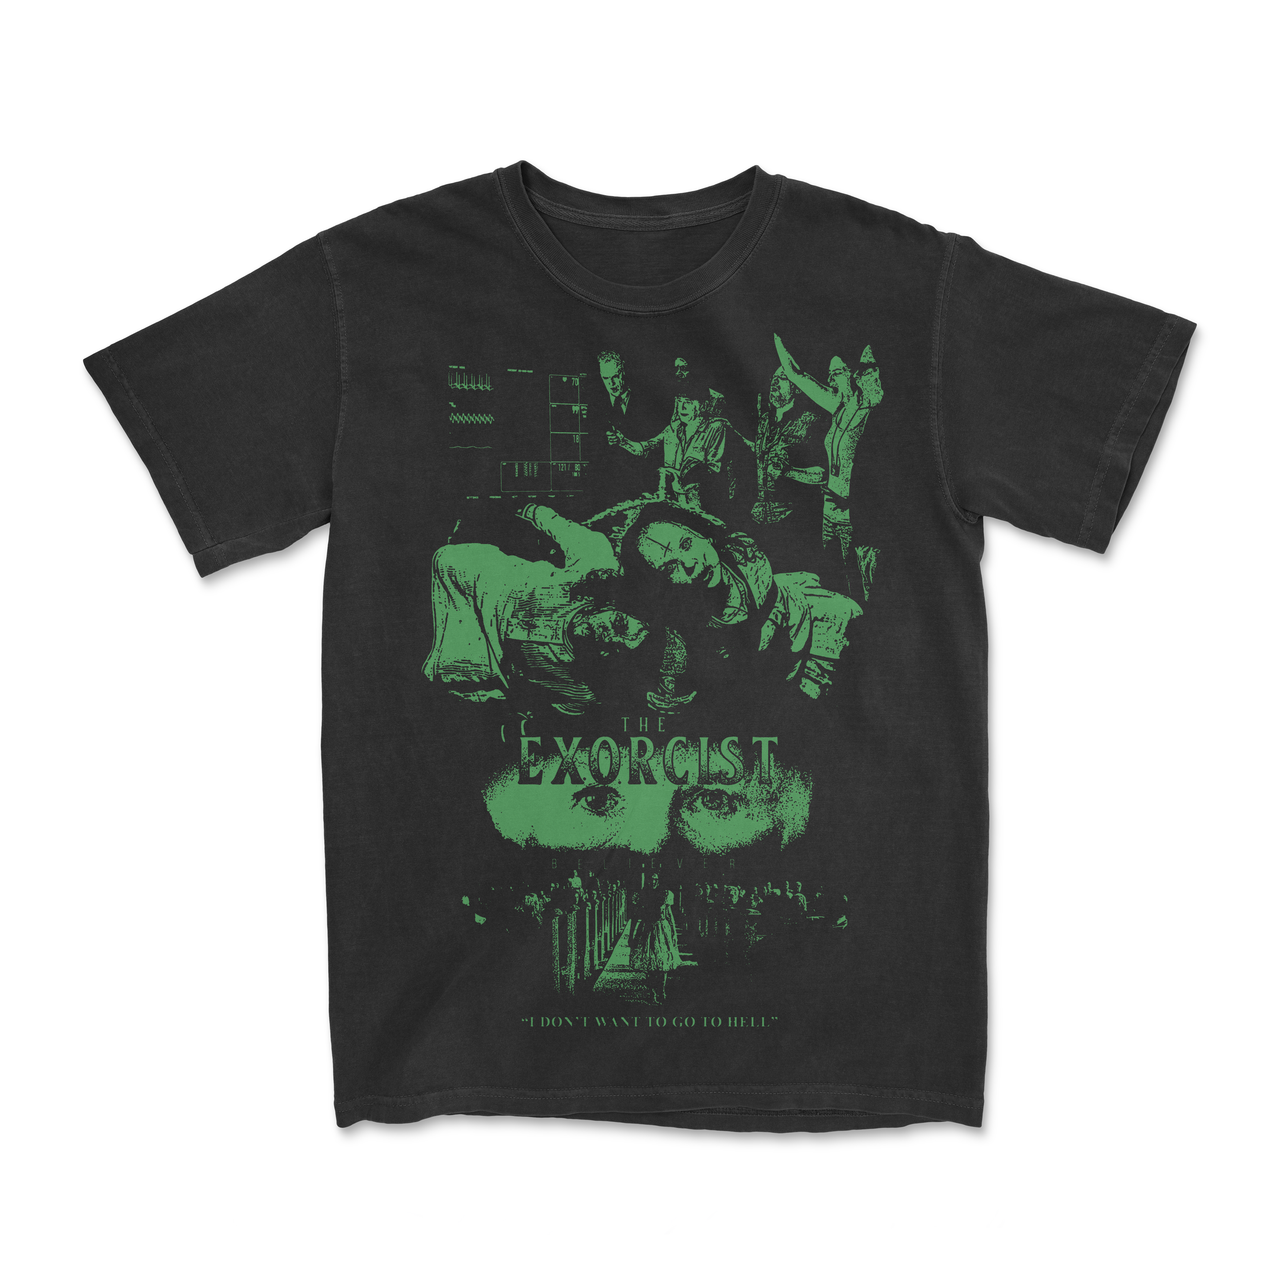 Believe the Exorcist Shirt